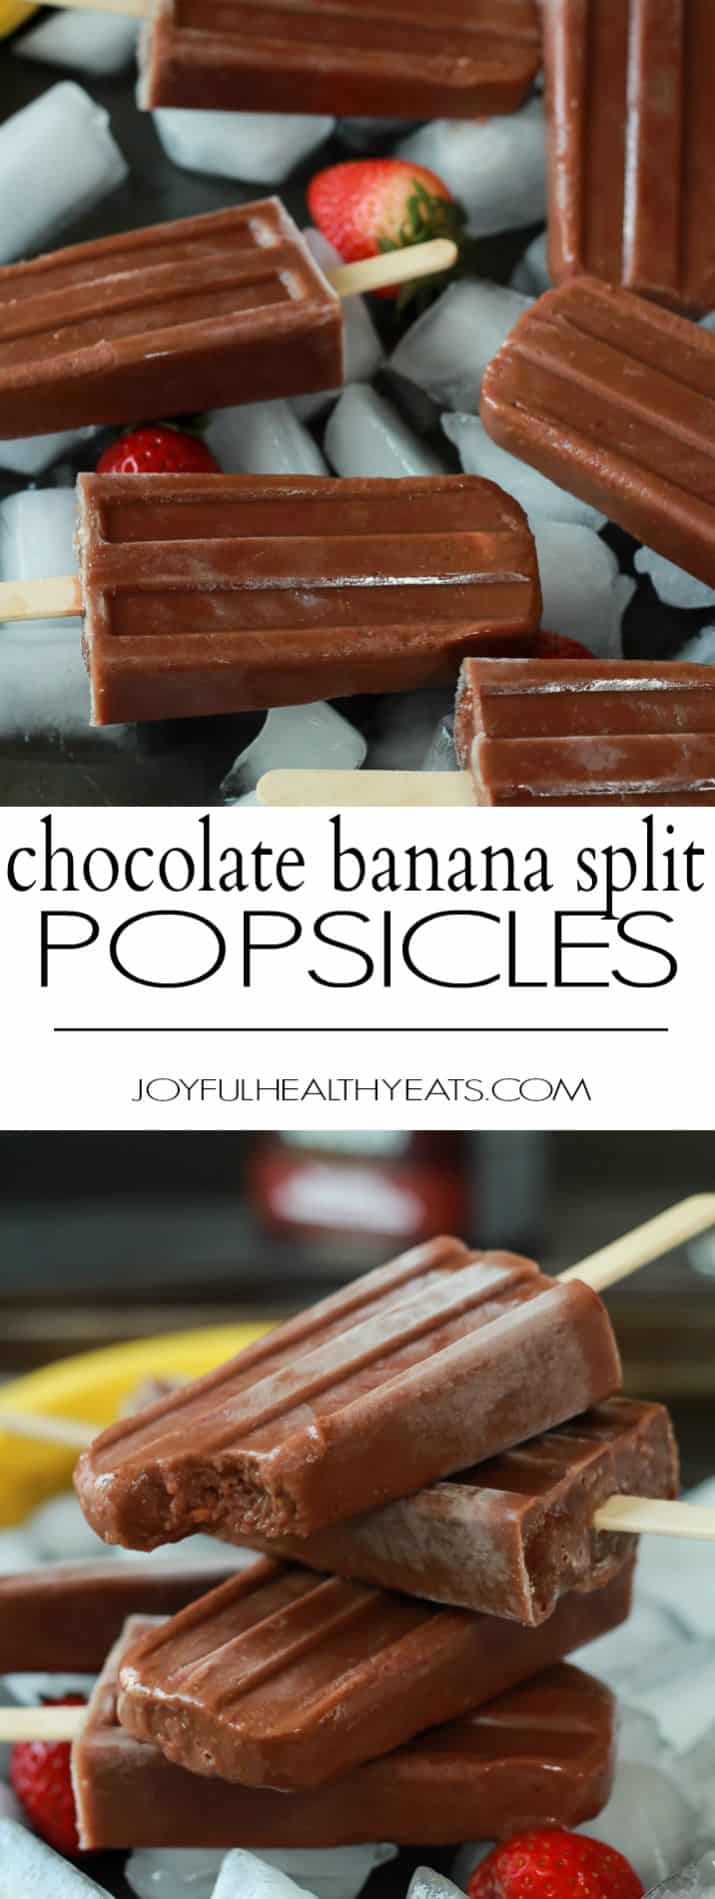 A collage of two images of chocolate banana popsicles with a label in between them introducing the dessert